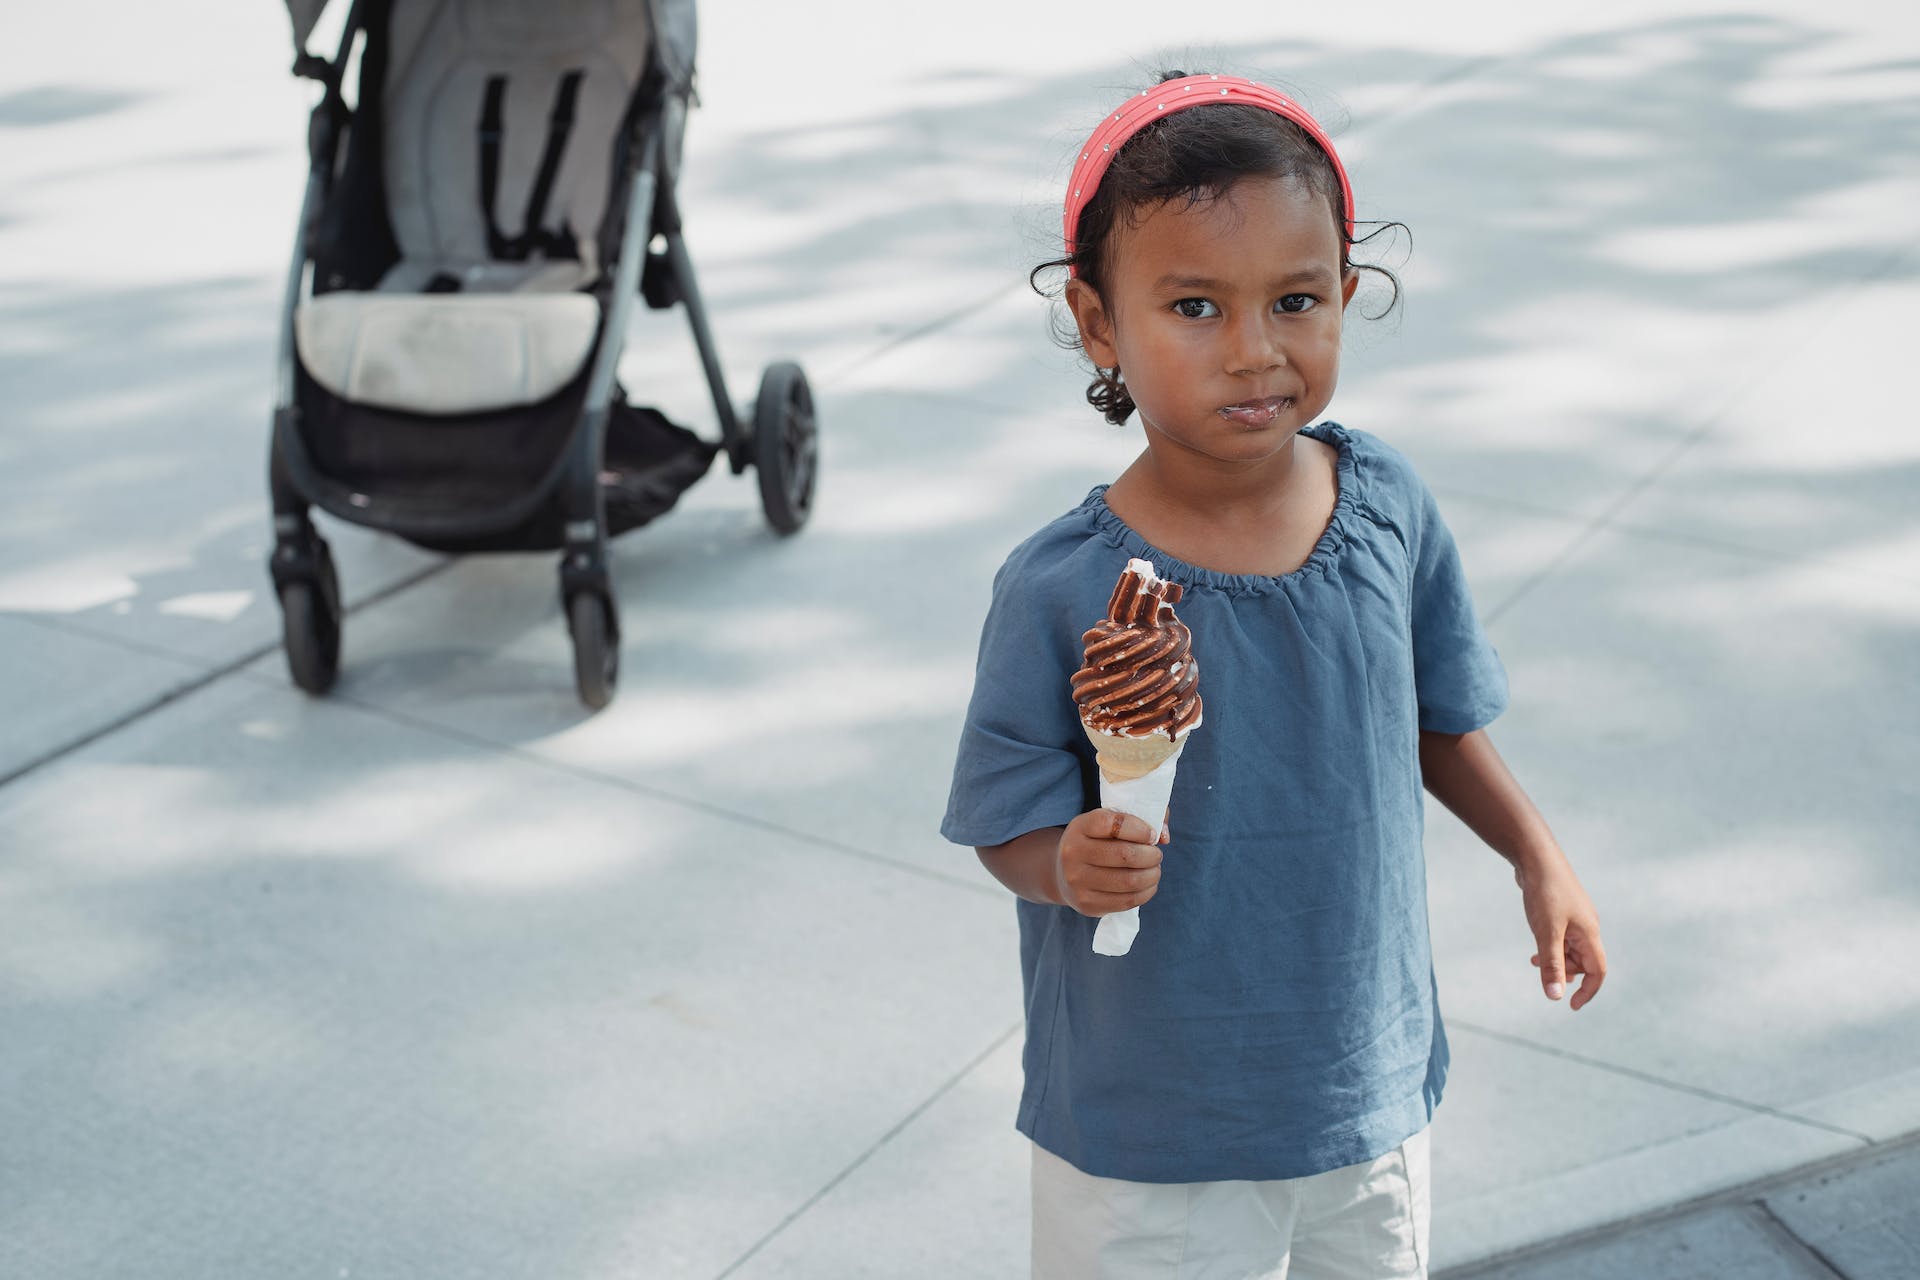 A little girl eating ice cream | Source: Pexels